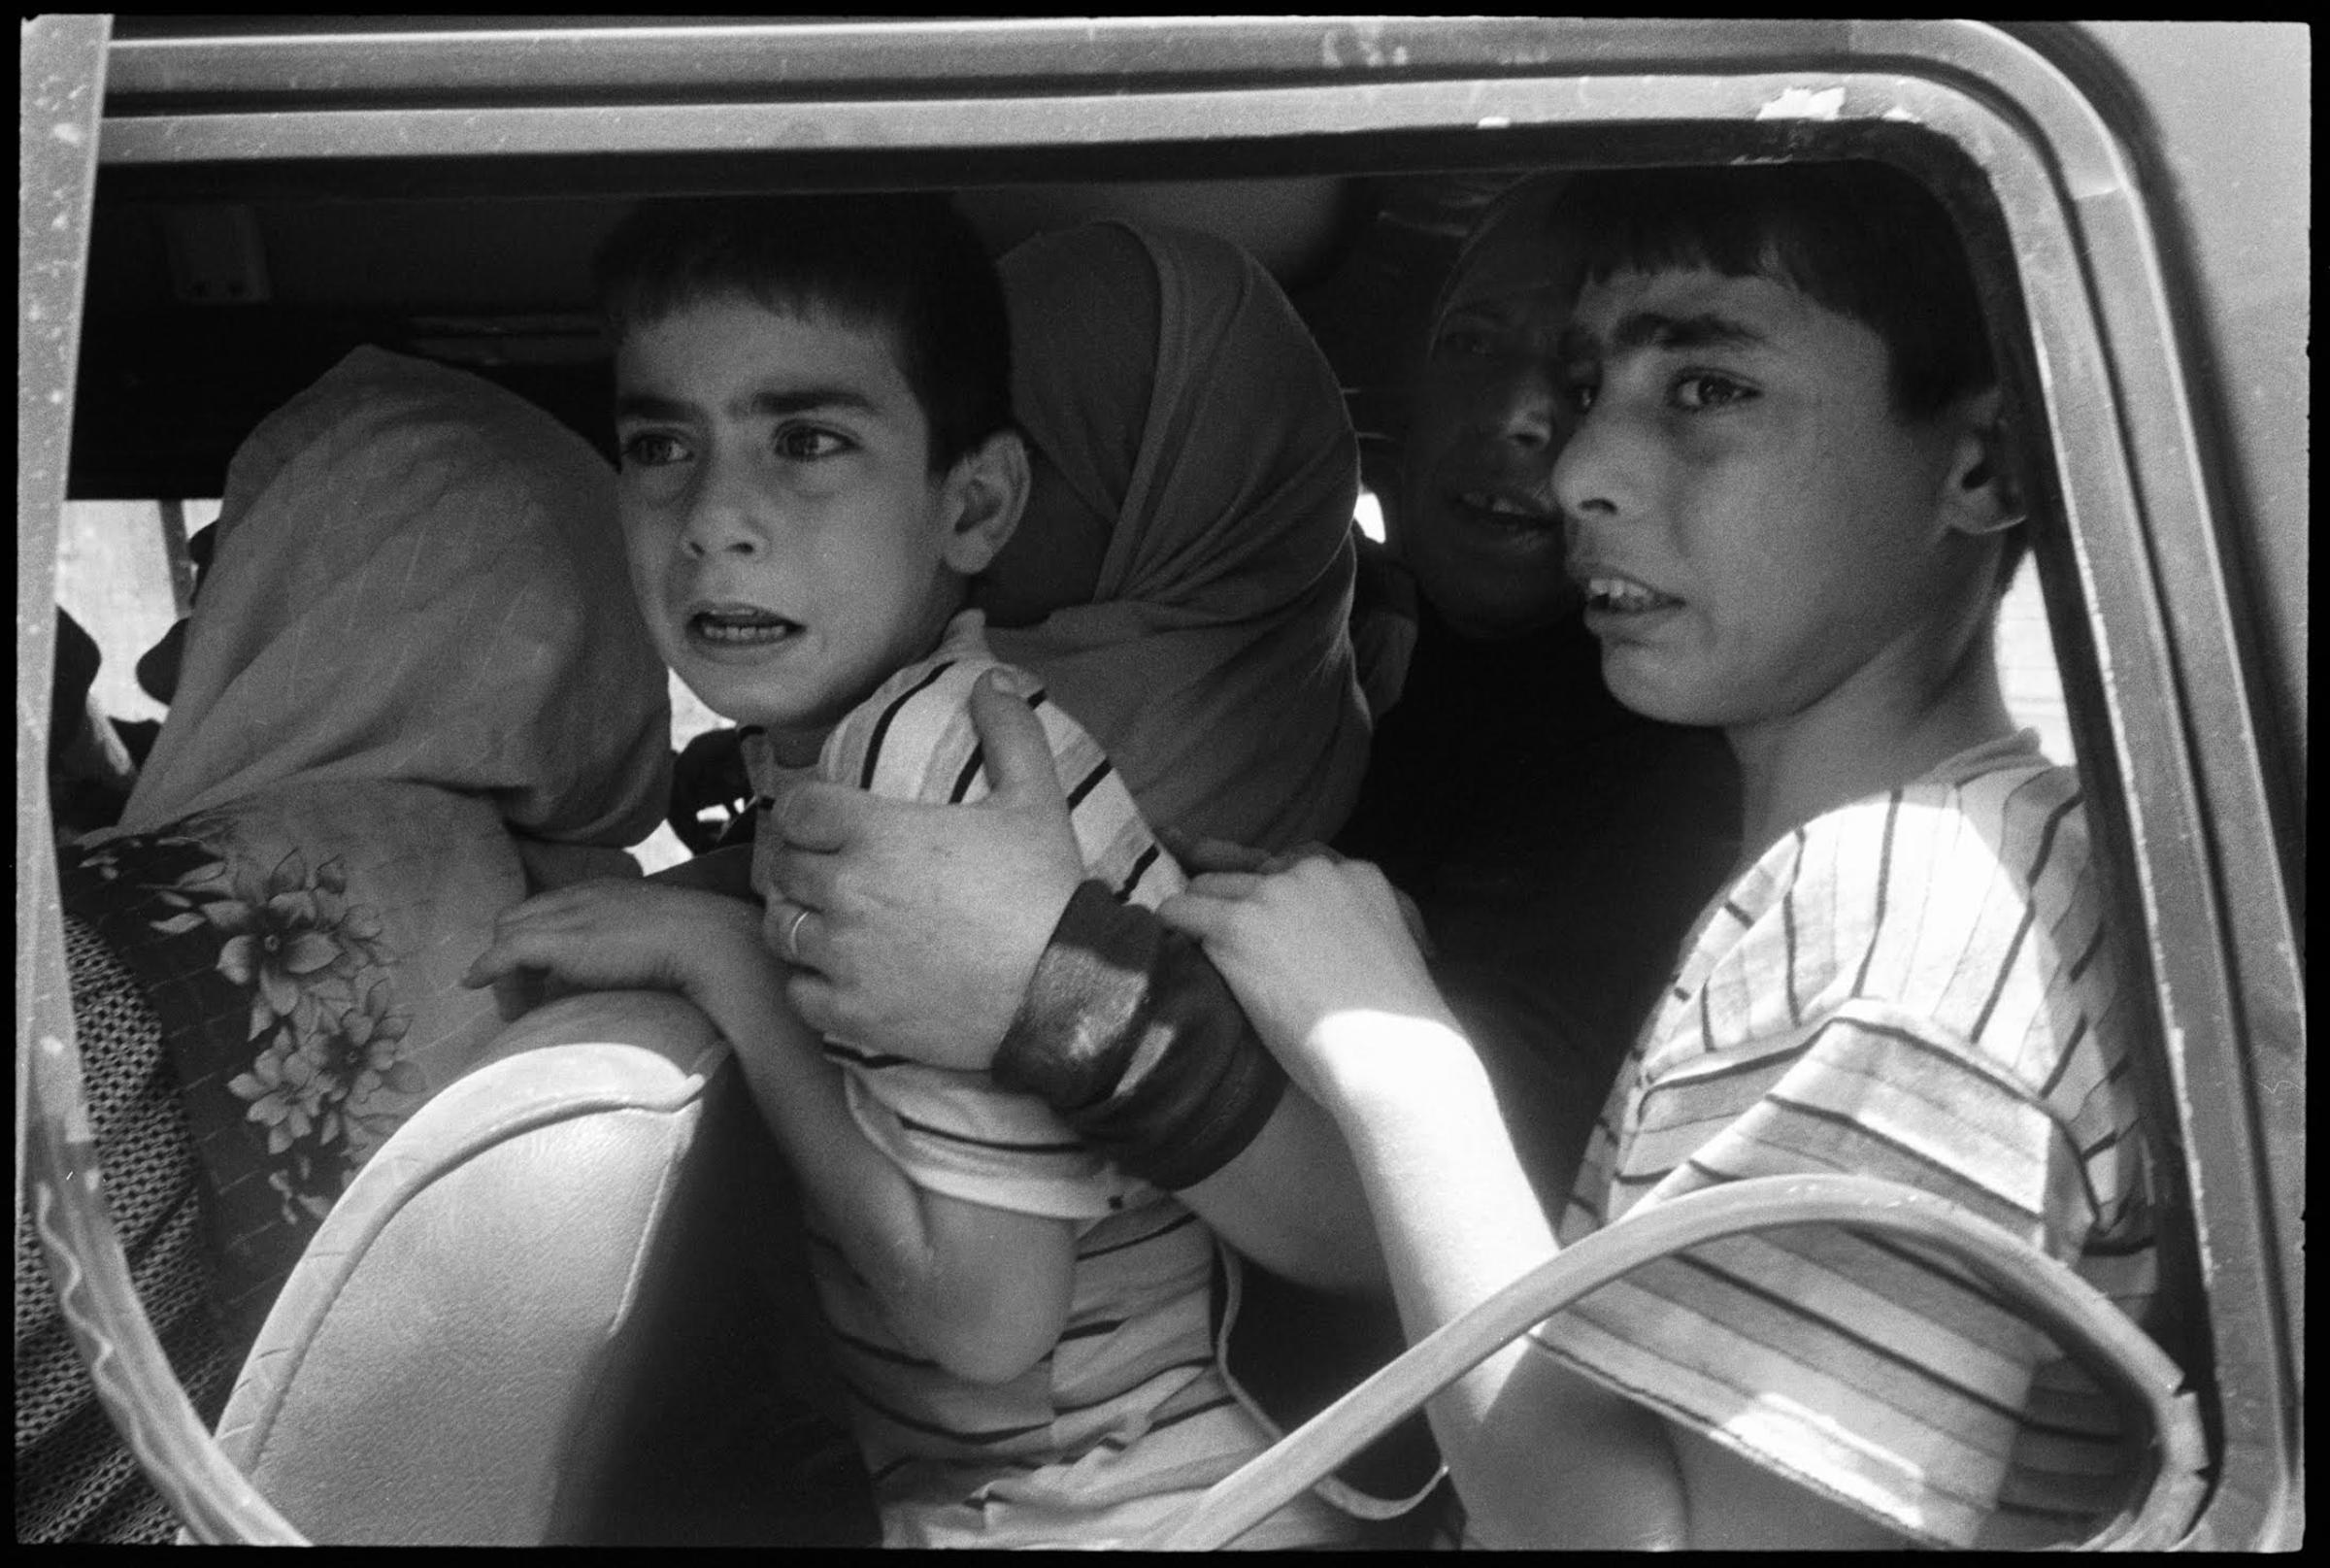 I'm a mother of two young boys now. I understand this photograph in a way that I wasn't capable of when I took it. We all took advantage of a temporary halt in Israeli air strikes in the middle of the war. Journalists were finally safer to drive around, and those trapped in bombarded villages were given an opportunity to escape. We entered Aitaroun and found people emerging out of a flattened village. It was a moment of chaos as people realized it was quiet and safe to flee. At the time, there were only enough vehicles to evacuate women and children. It was a moment of true fear, as these boys knew they were leaving their father behind.